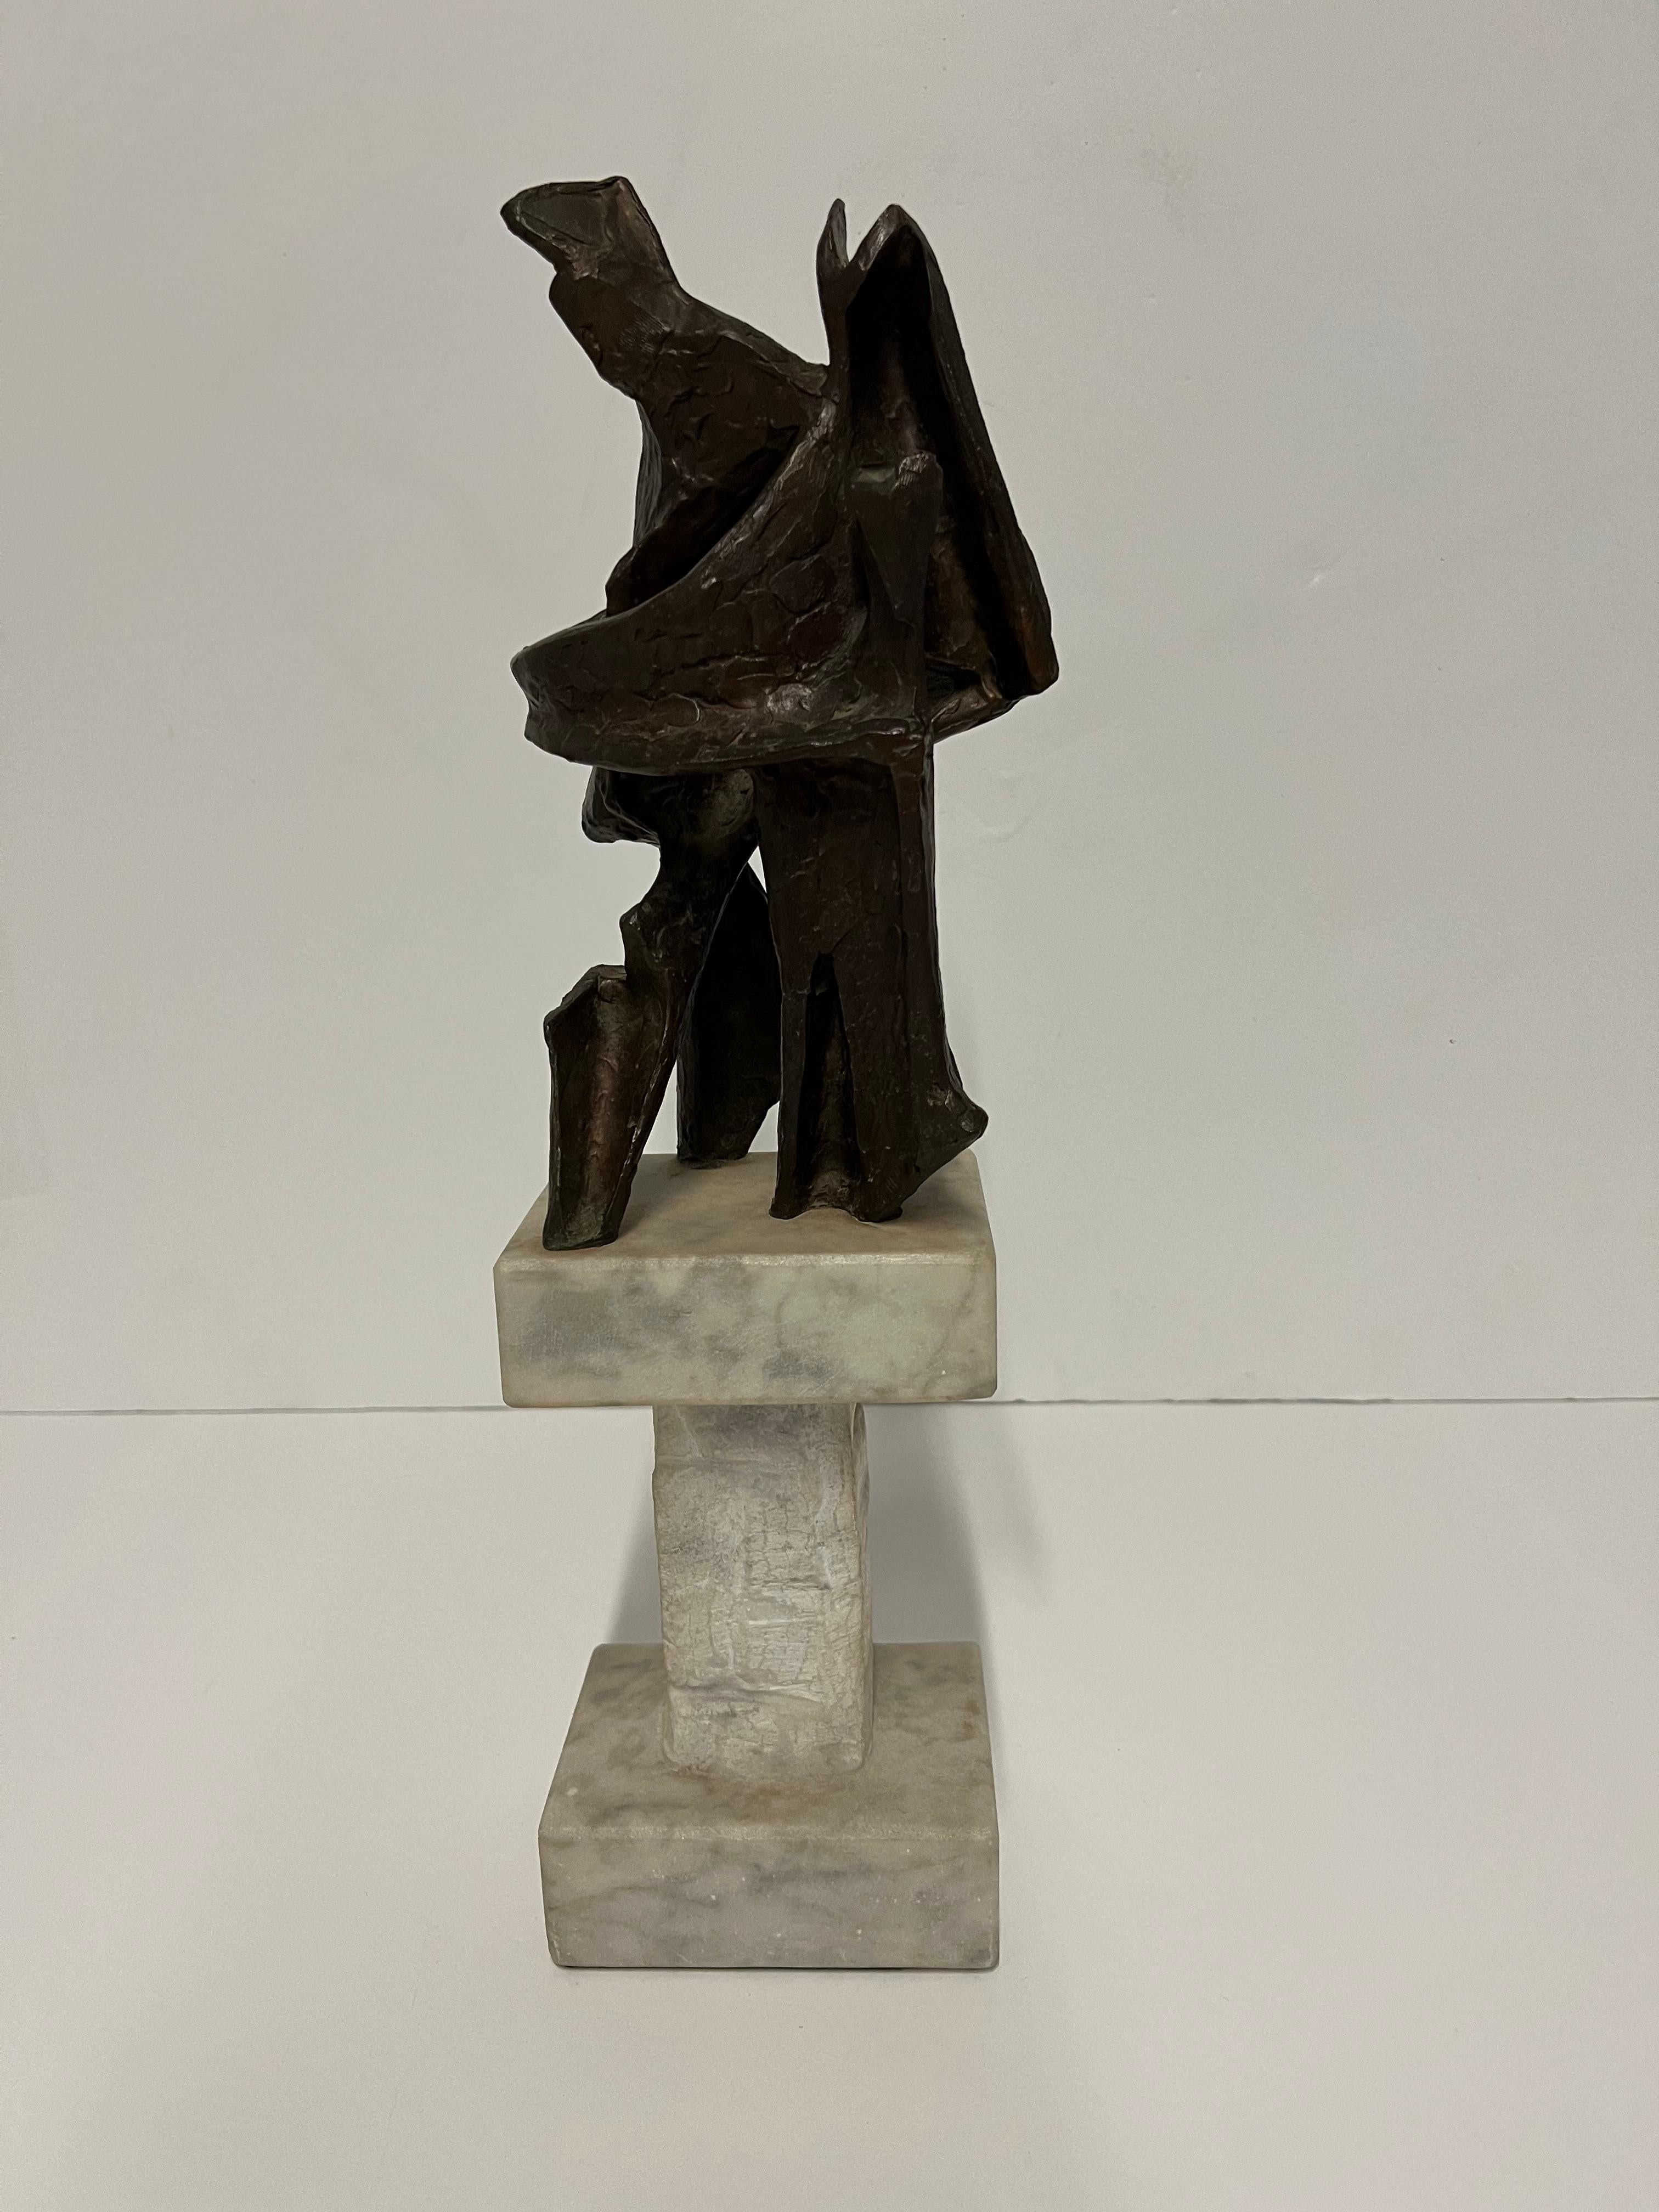 The artwork is a patinated bronze on a marble base. It features a dancing couple. The bronze itself is 10"25 H. It is signed in the cast: S. Carl
Overall excellent condition with minor scuffs and oxidation to bronze commensurate with age.

Joan